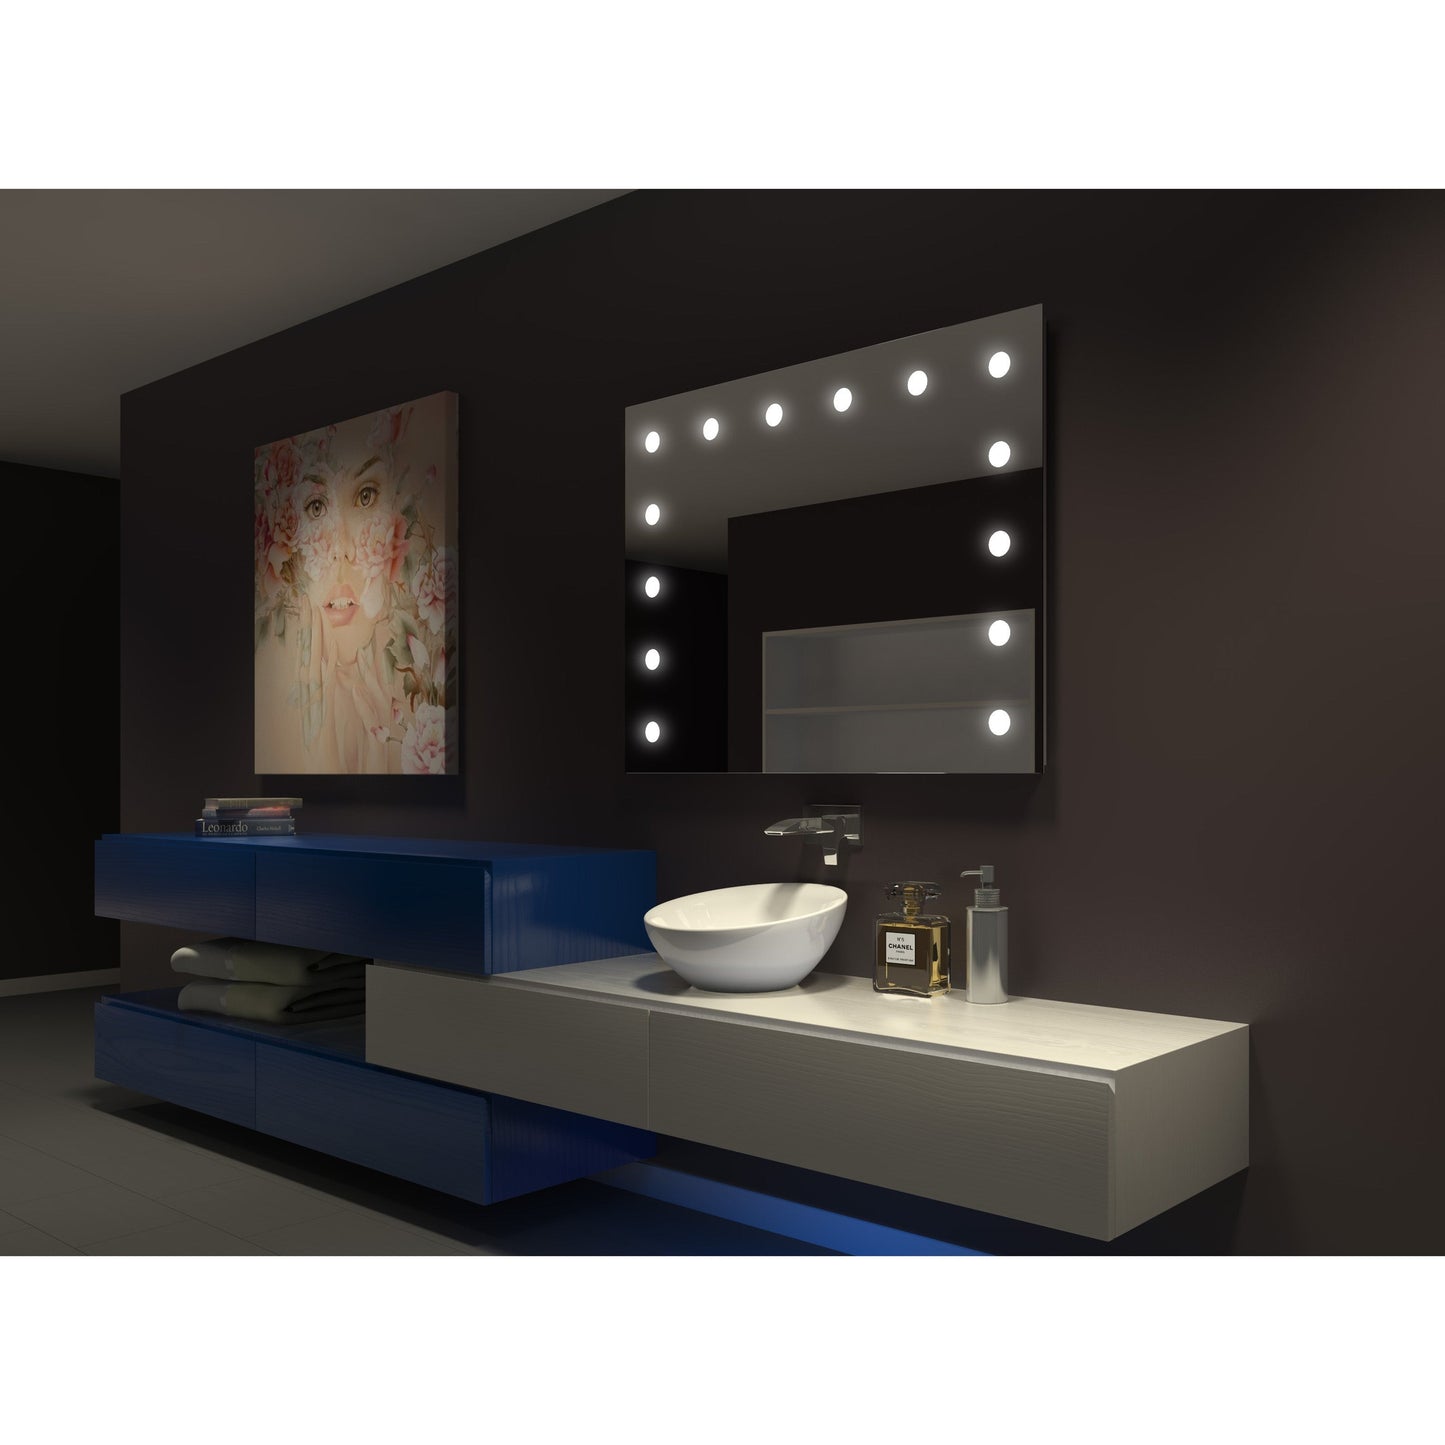 Paris Mirror Hollywood 48" x 36" Front-Lit Lighted Super Bright Dimmable Wall-Mounted 3000K LED Mirror